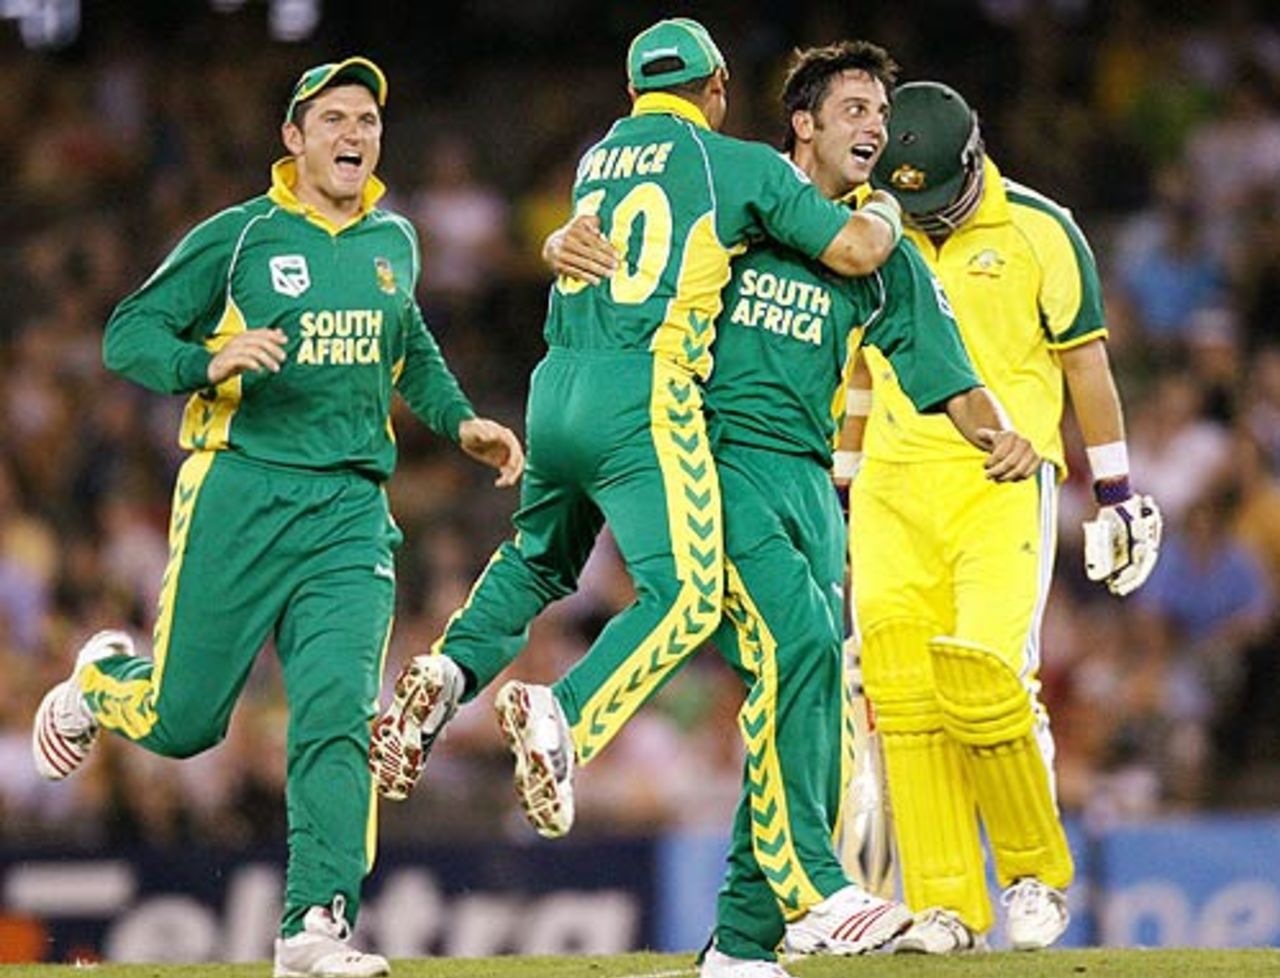 Johannes van der Wath celebrates with his team-mates after dismissing Phil Jaques , Australia v South Africa, VB Series, Telstra Dome, Melbourne, January 20, 2006